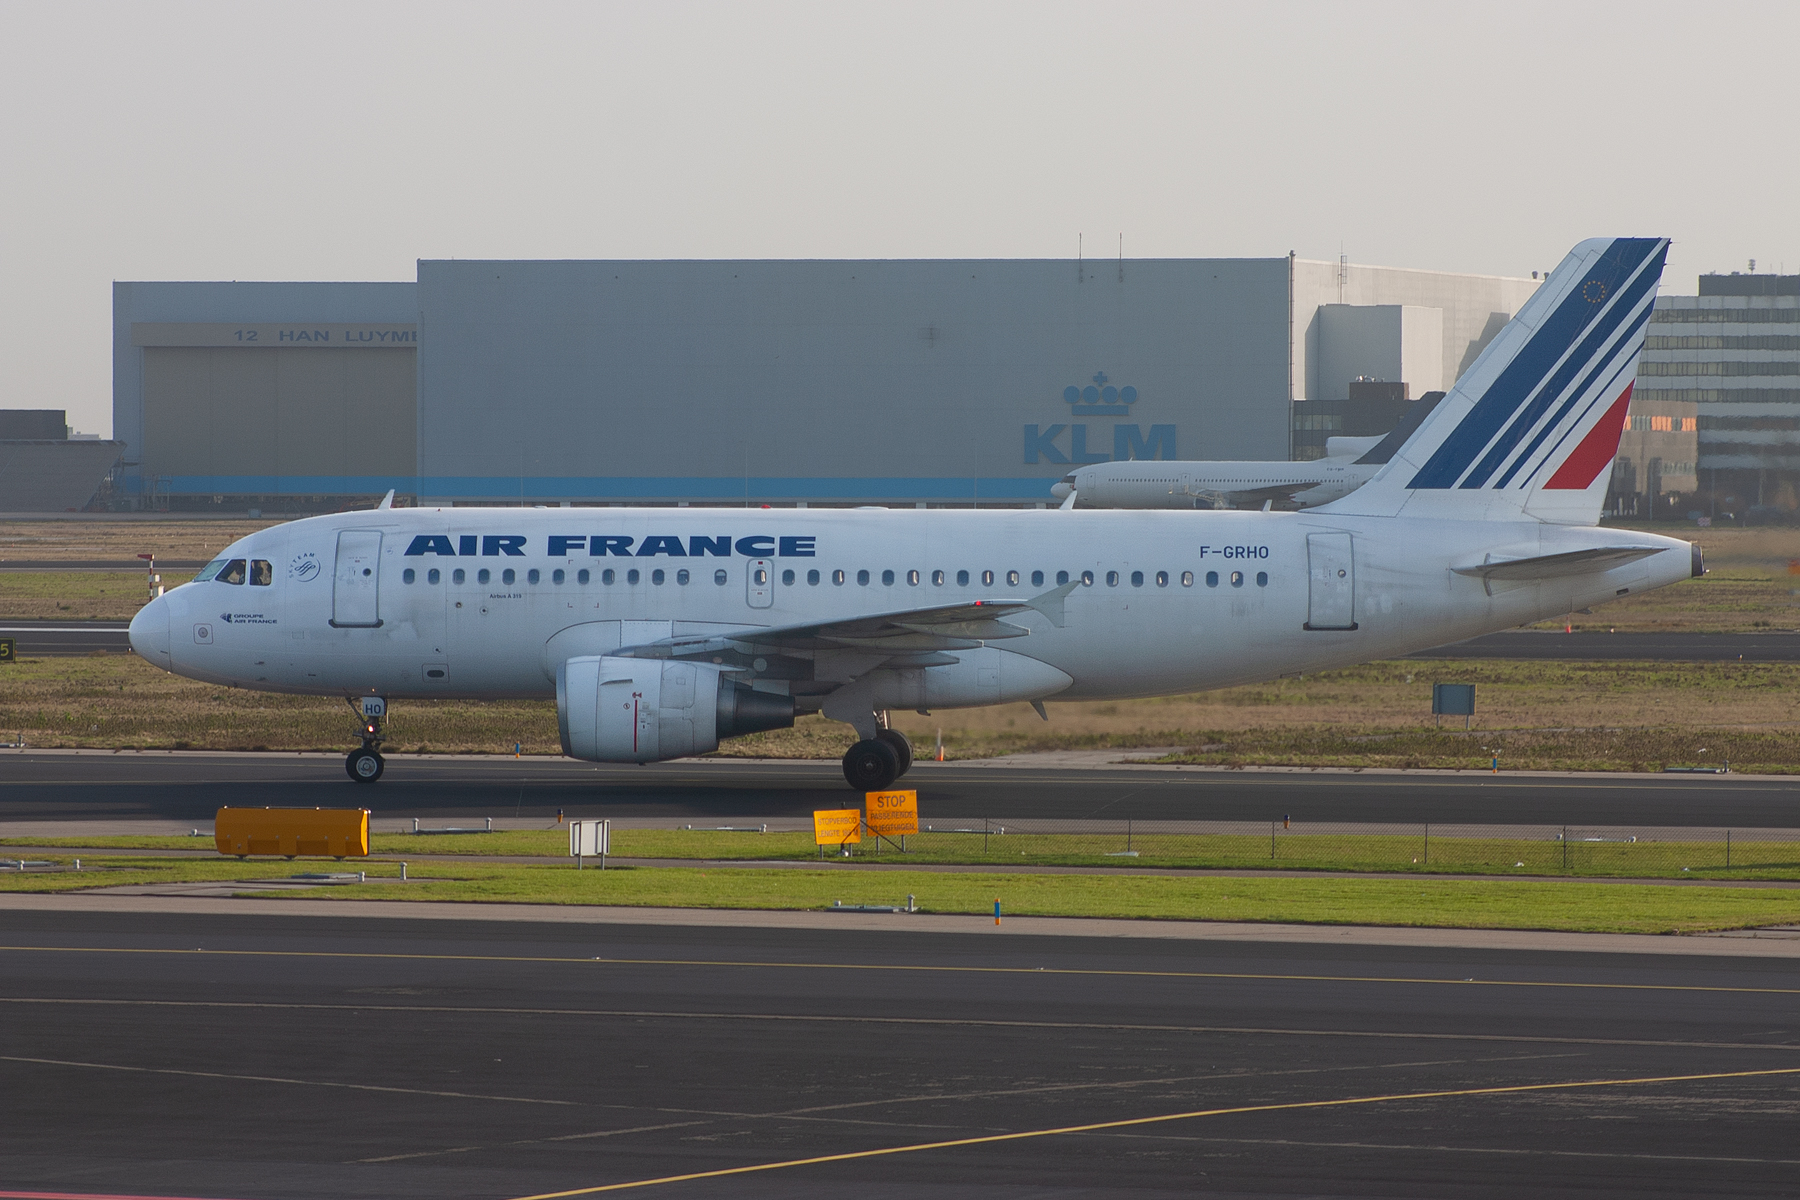 Air France Airbus A319-100 F-GRHO at Schiphol